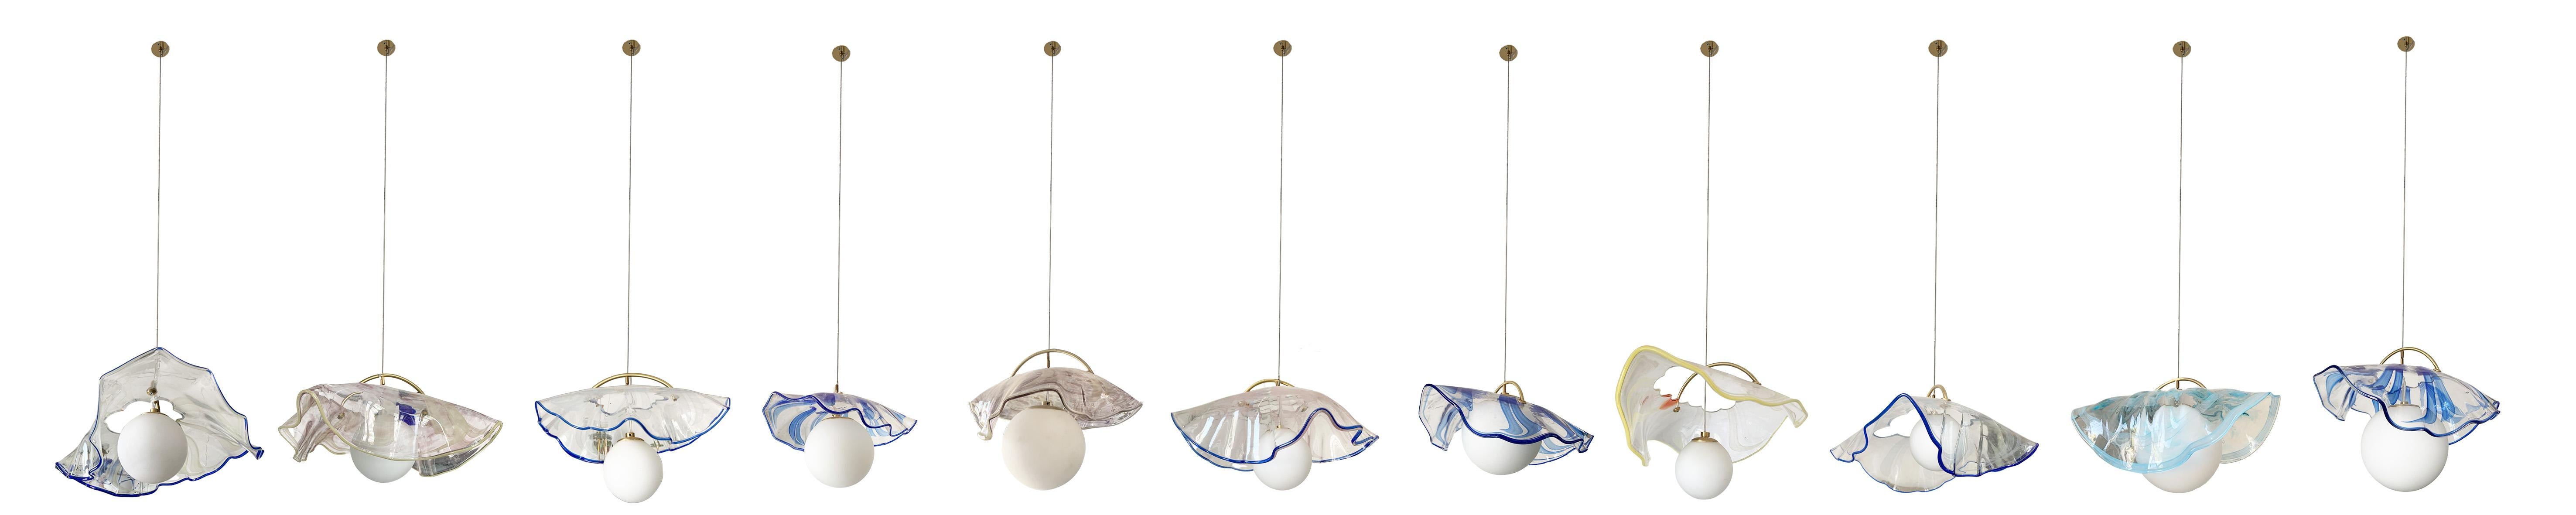 jellyfish pendant lamp by Sema Topaloglu

jellyfish lamps are a collection, the price is for 7 items.

This product is hand-crafted therefore each production is unique and might not be exactly the same as visual.

Sema Topaloglu Studio is